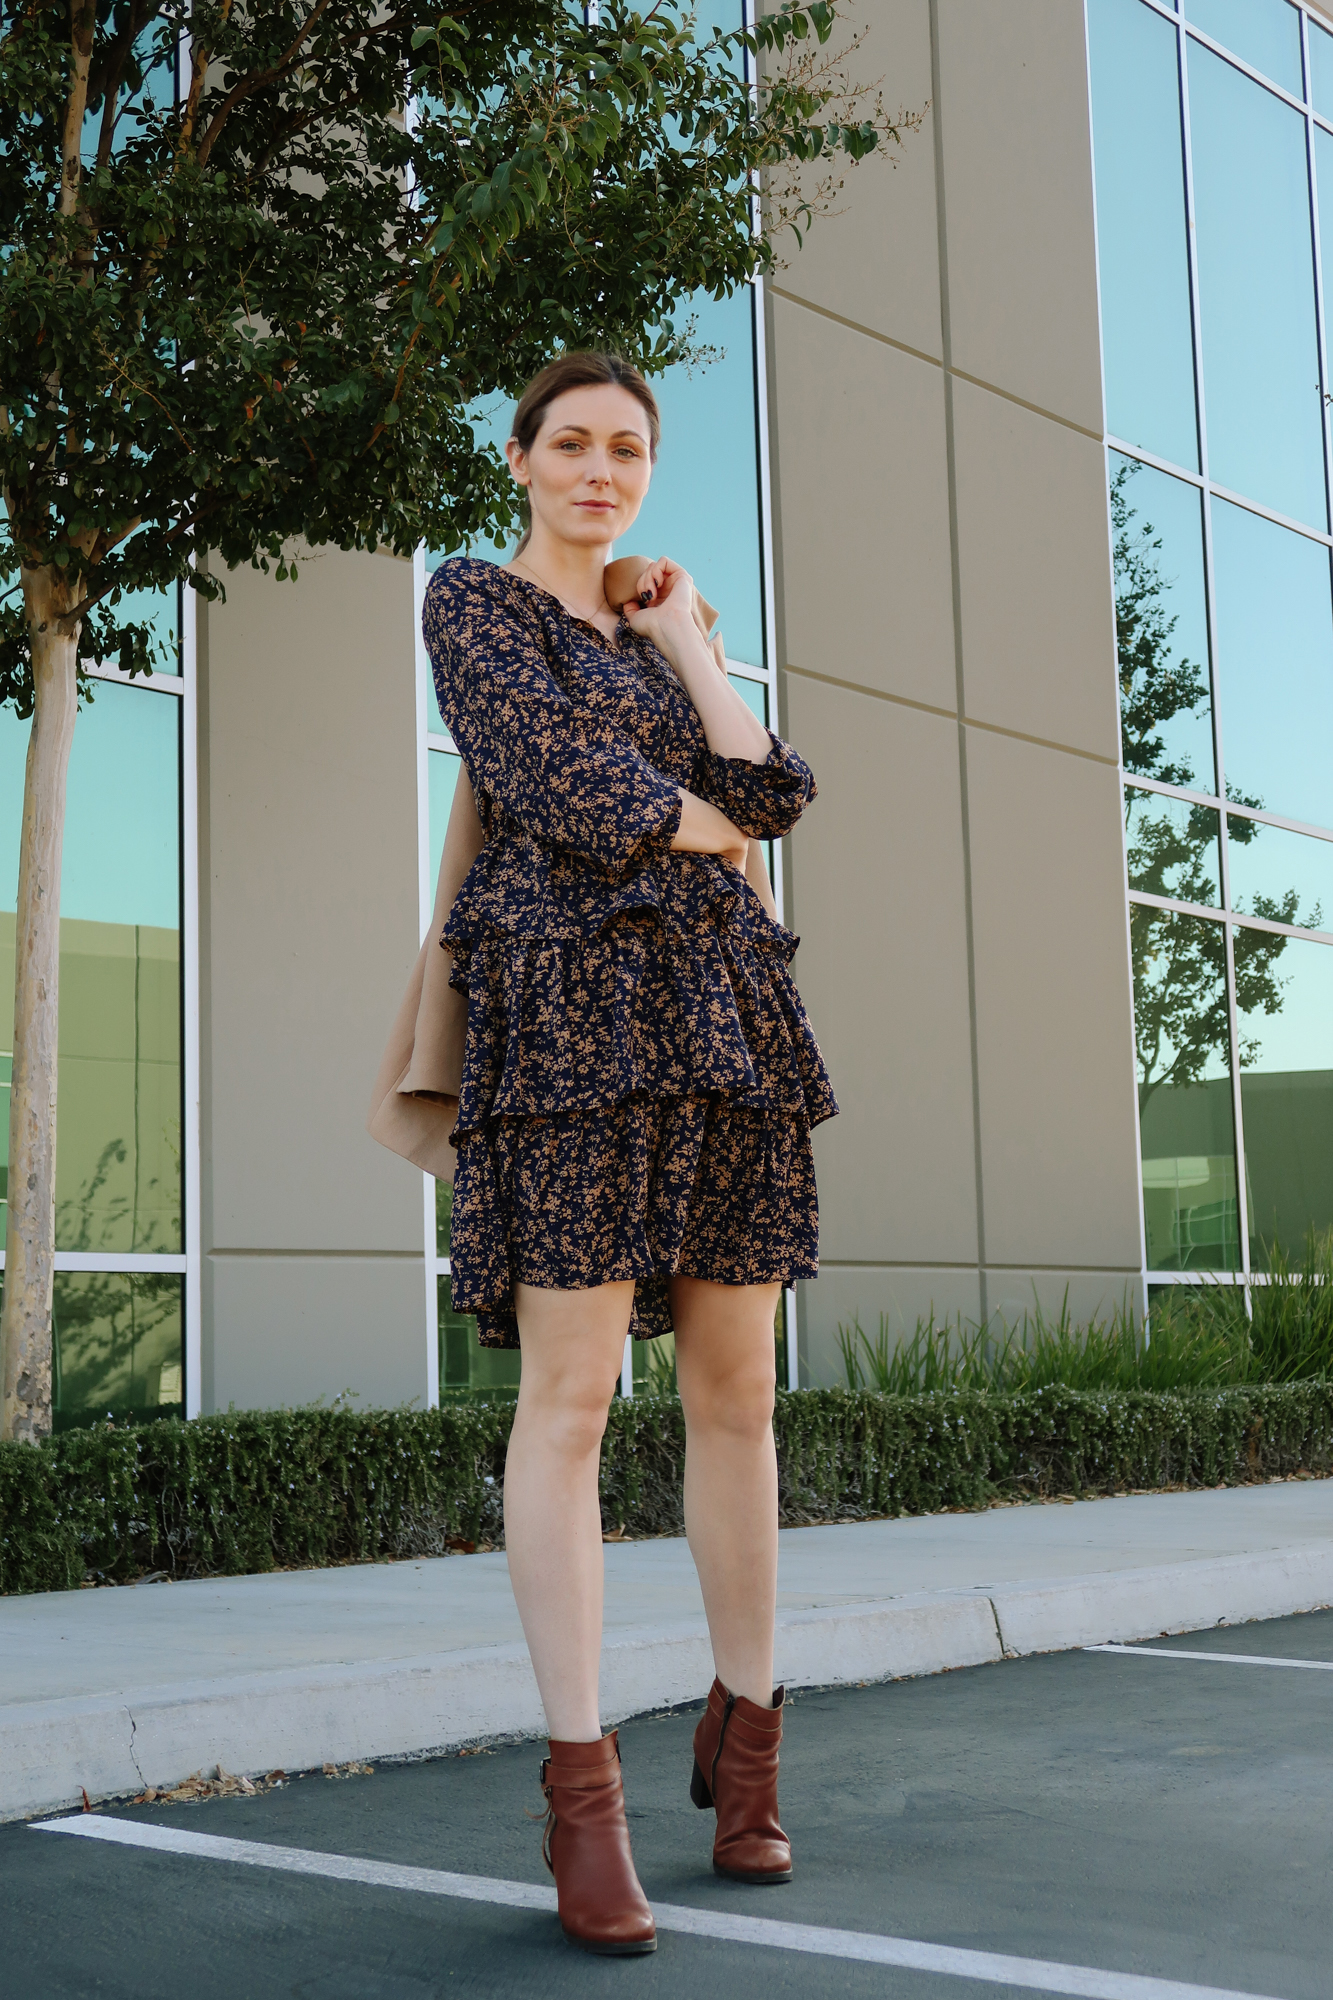 Ruffle dress and camel coat | Easy Casual Outfits To Try Right Now by popular California fashion blog, Tea Cups and Tulips: image of a woman outside wearing a SheIn Ditsy Floral Layered Ruffle Hem A-Line Dress and SheIn Camel Double Breasted Coat With Welt Pocket.